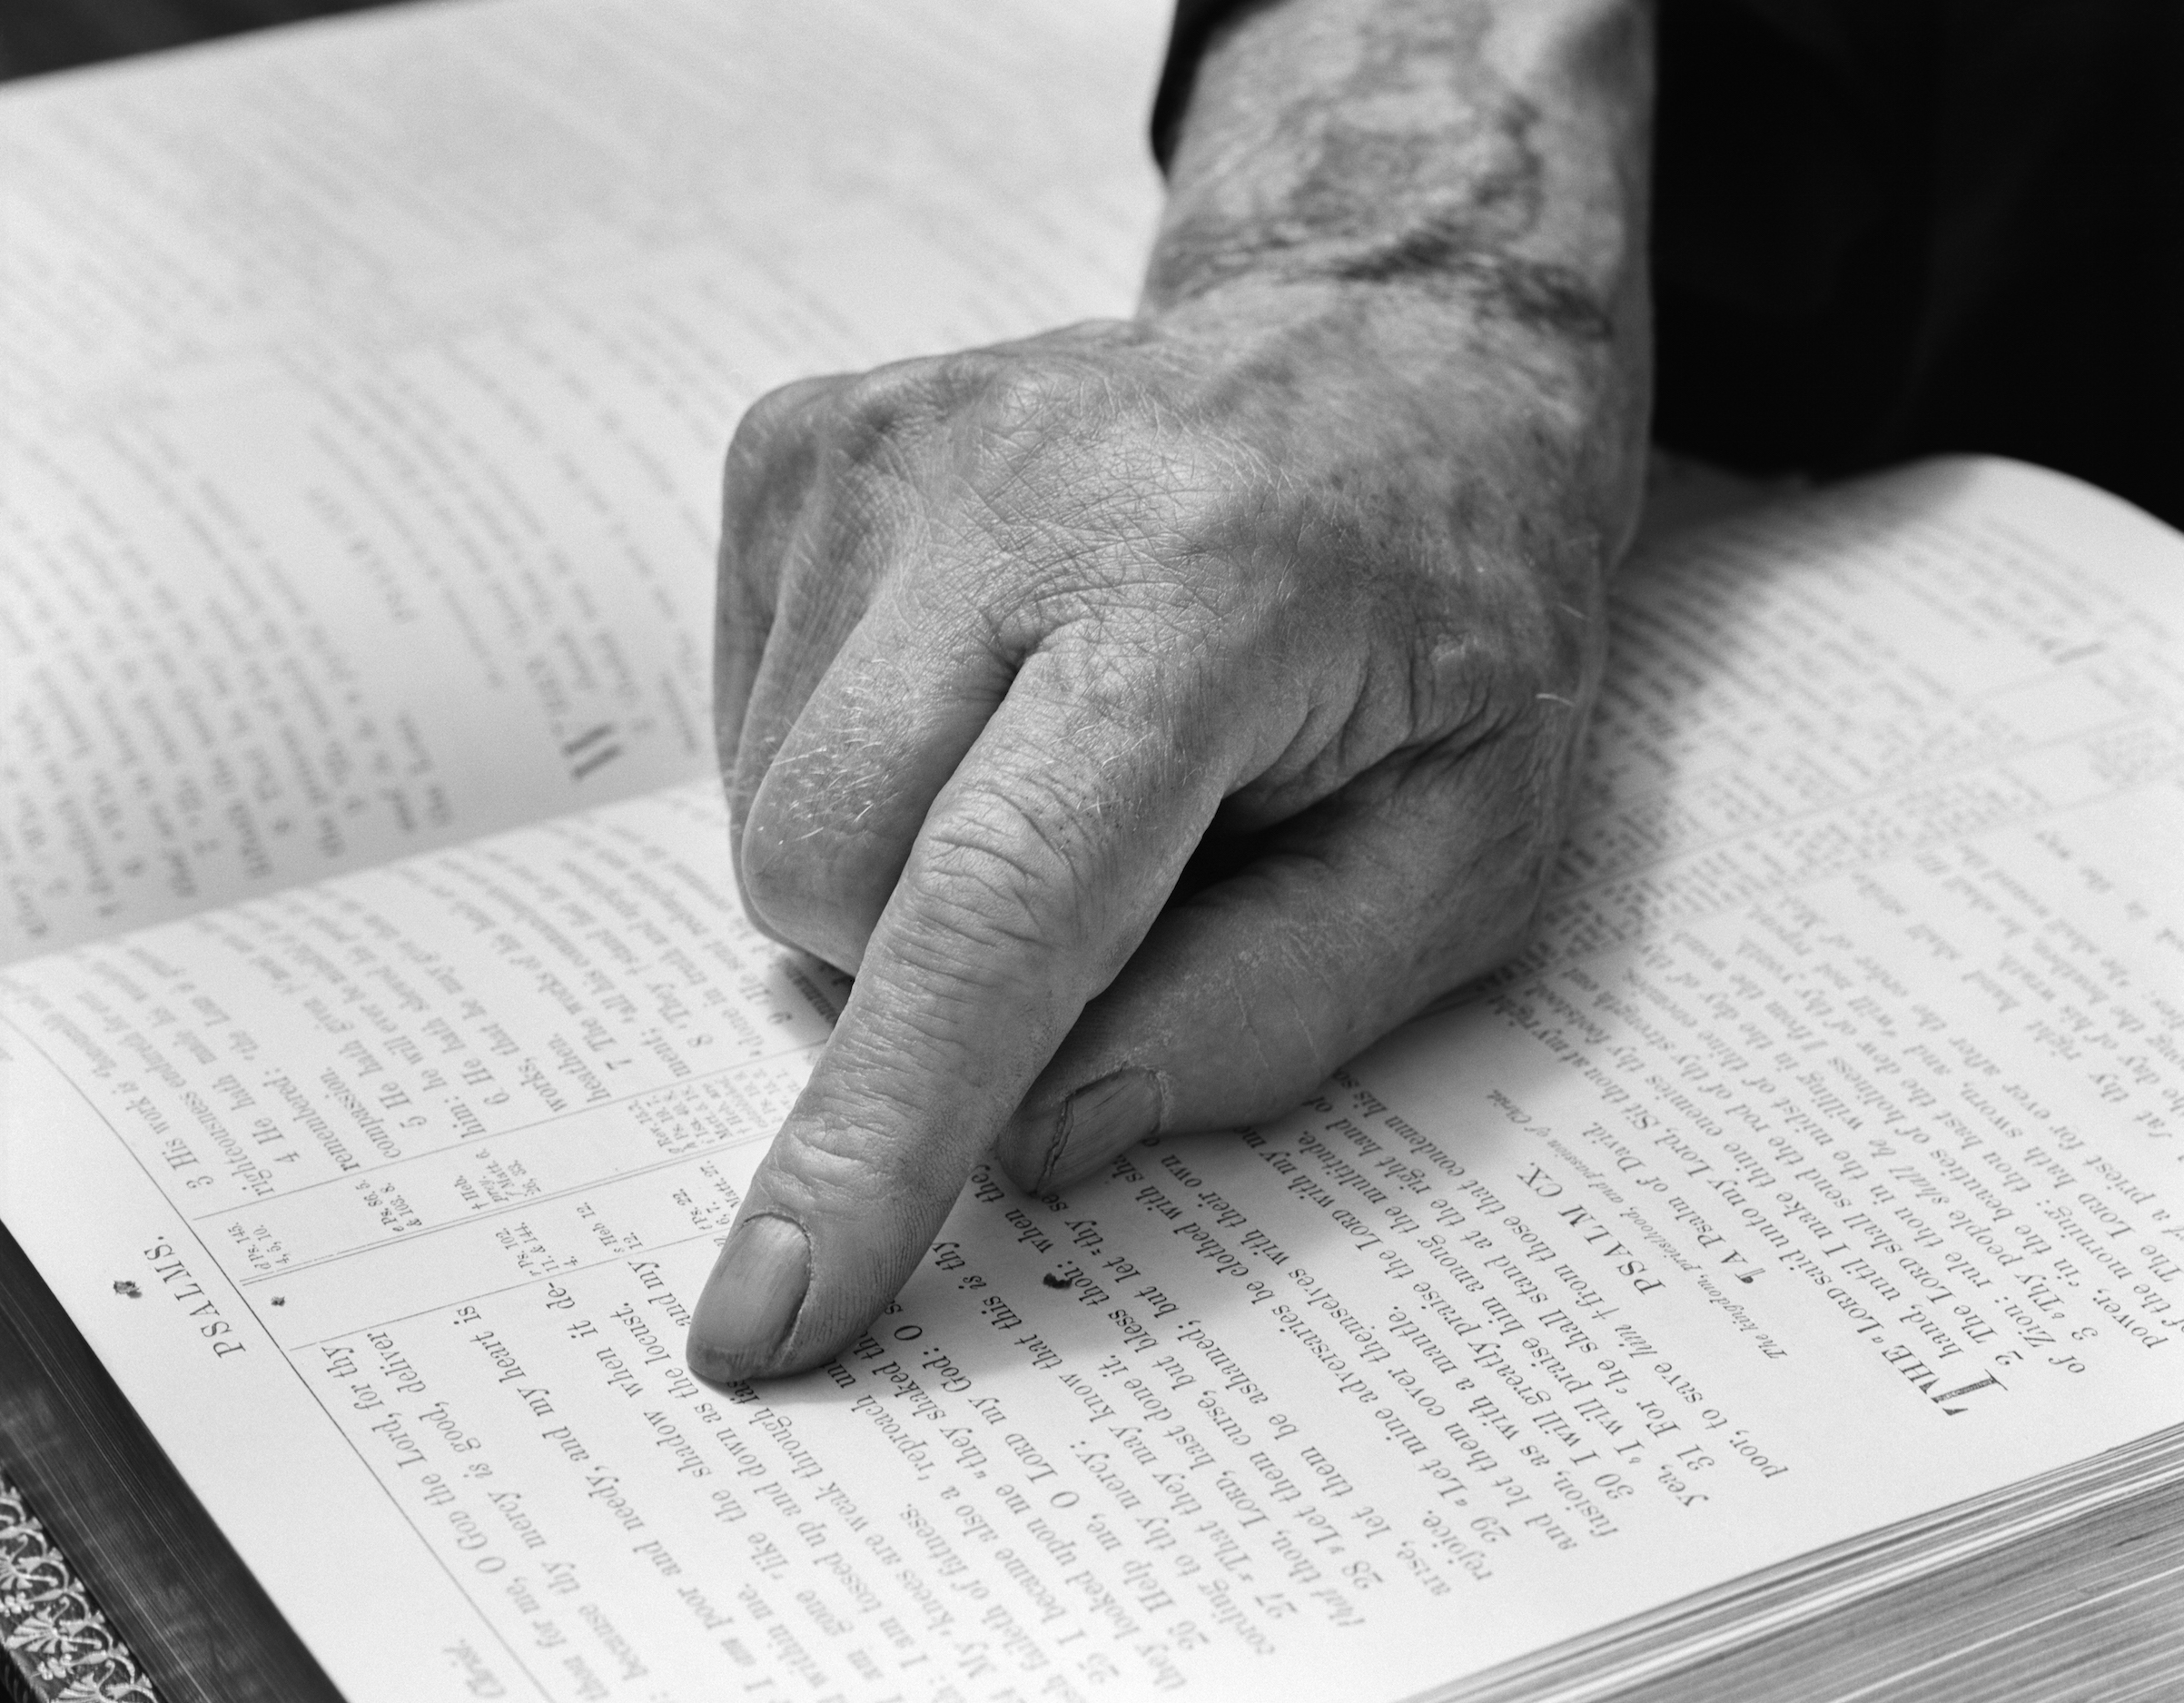 The hand of a man reading the Bible (H. Armstrong Roberts/ClassicStoc/Getty Images)